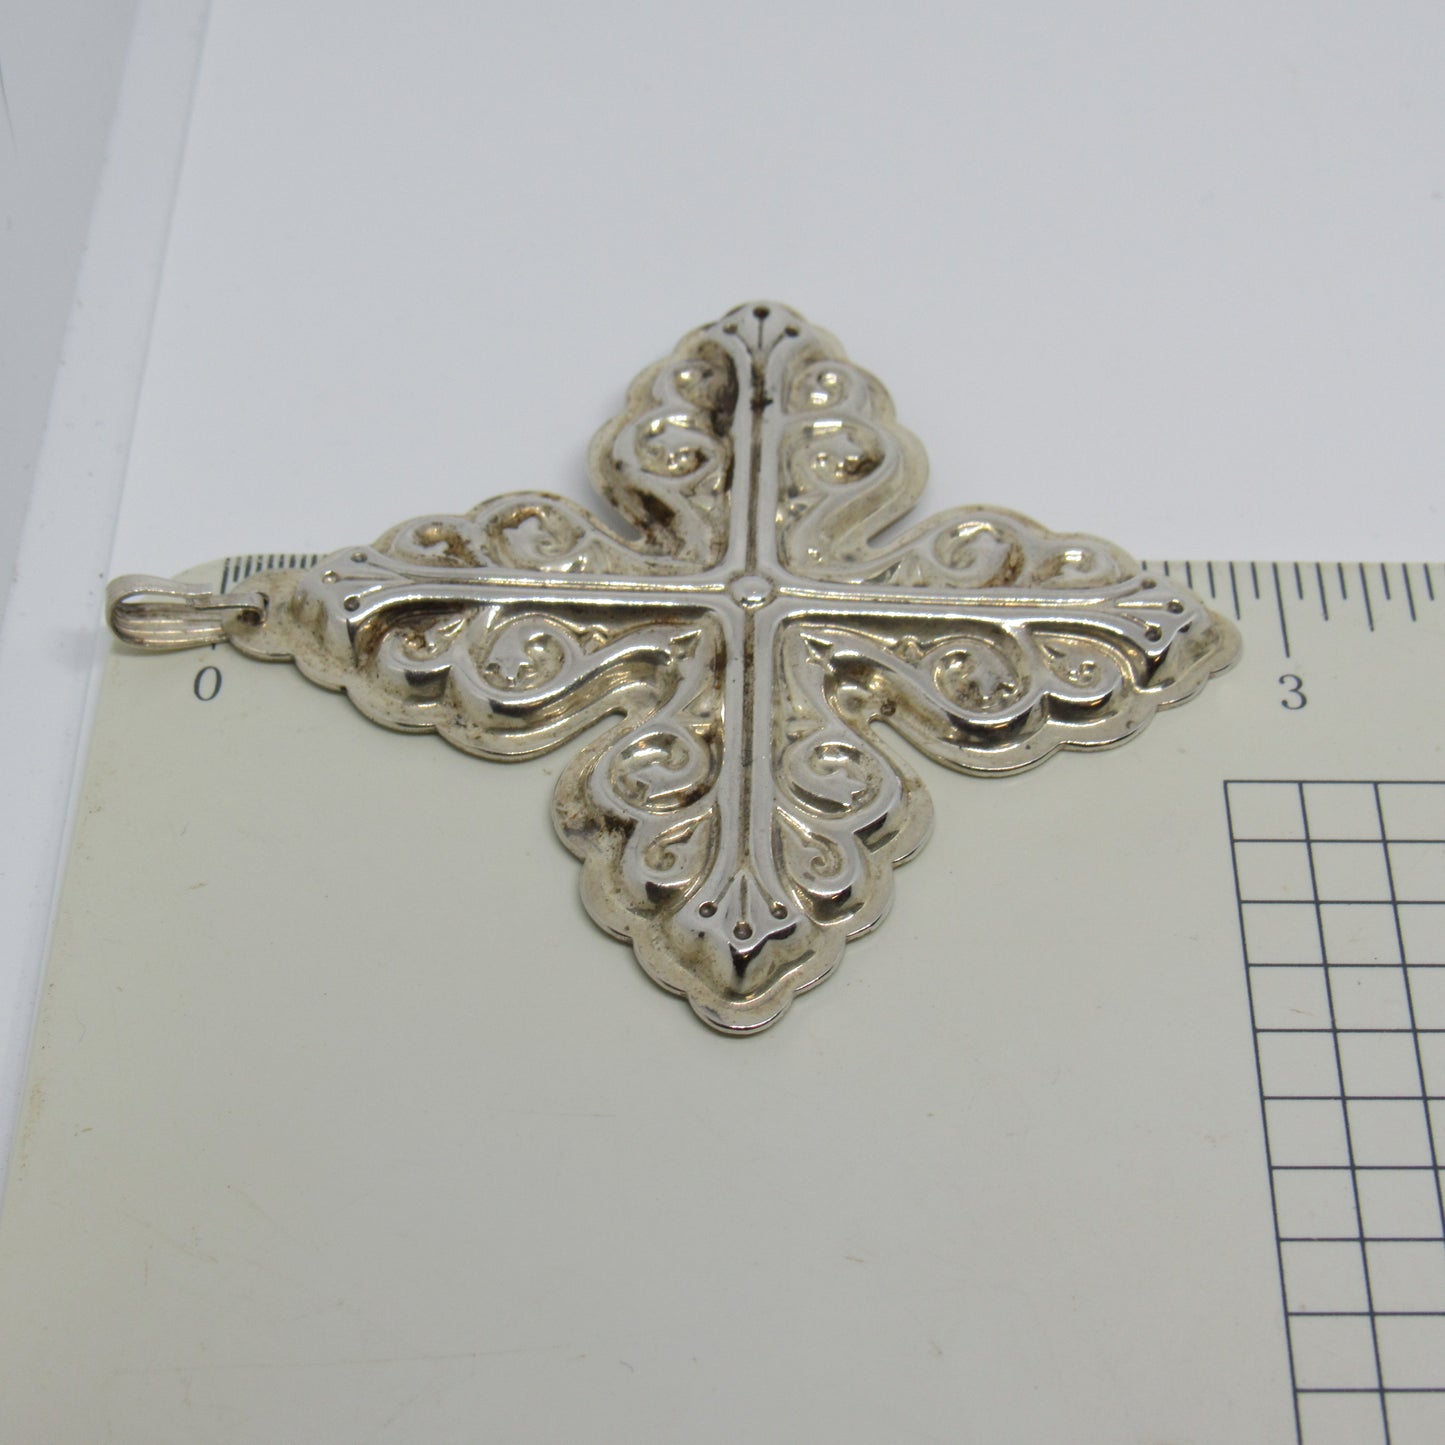 Vintage Reed & Barton 1978 Sterling Silver "Christmas Cross" Ornament